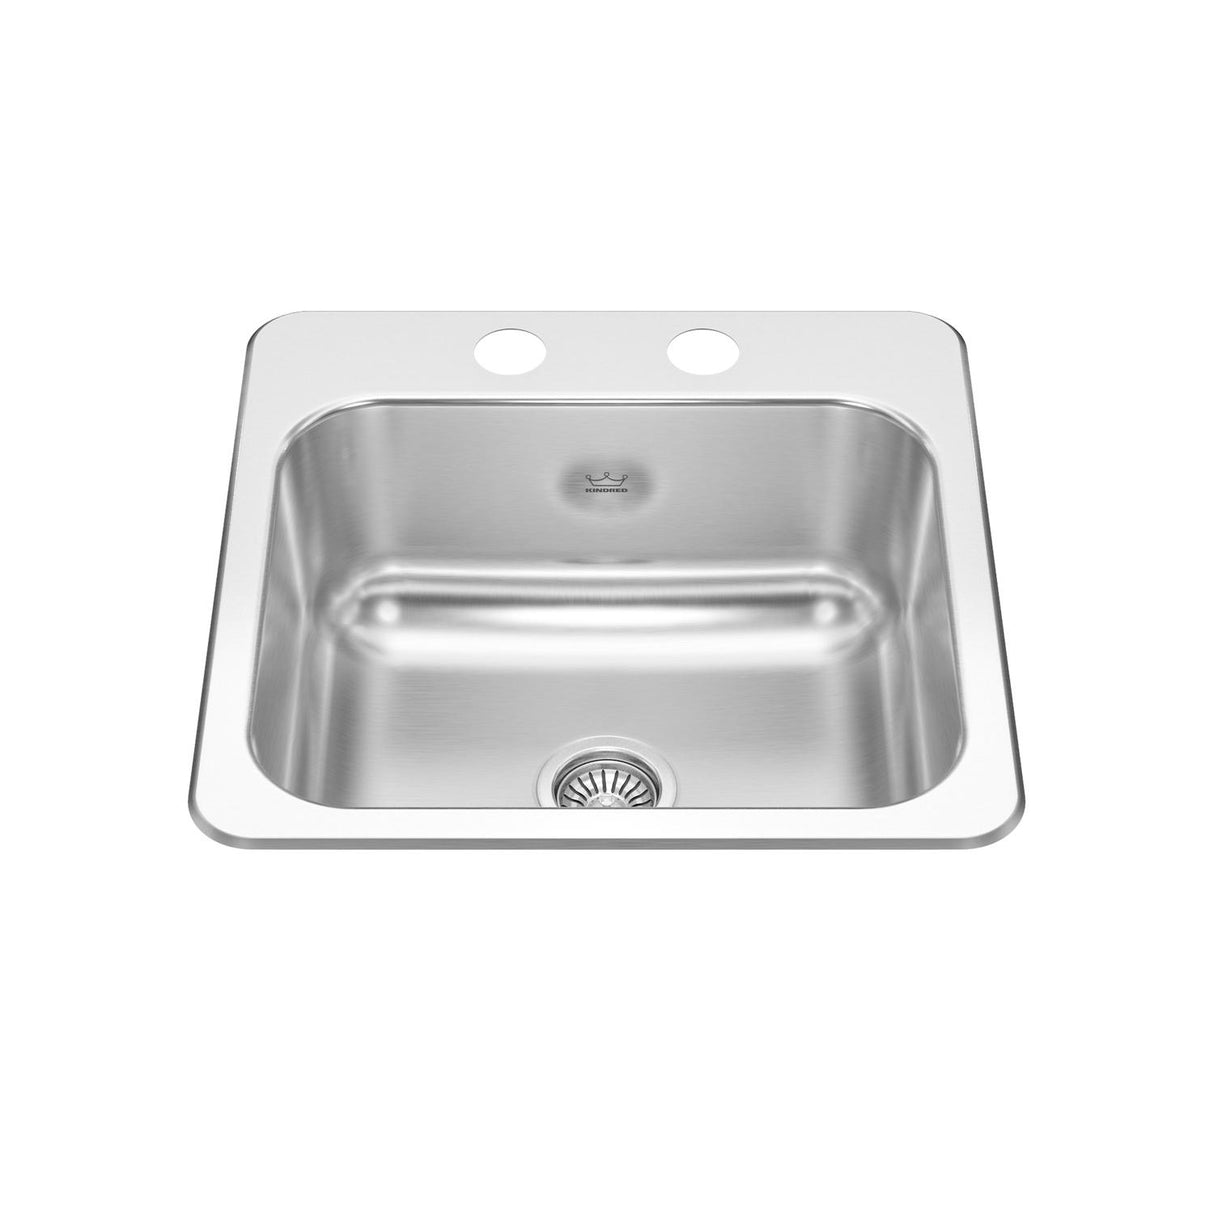 KINDRED CSLA1515-6-2CBN Creemore 15-in LR x 15-in FB x 6-in DP Drop In Single Bowl 2-Hole Stainless Steel Hospitality Sink In Commercial Satin Finish